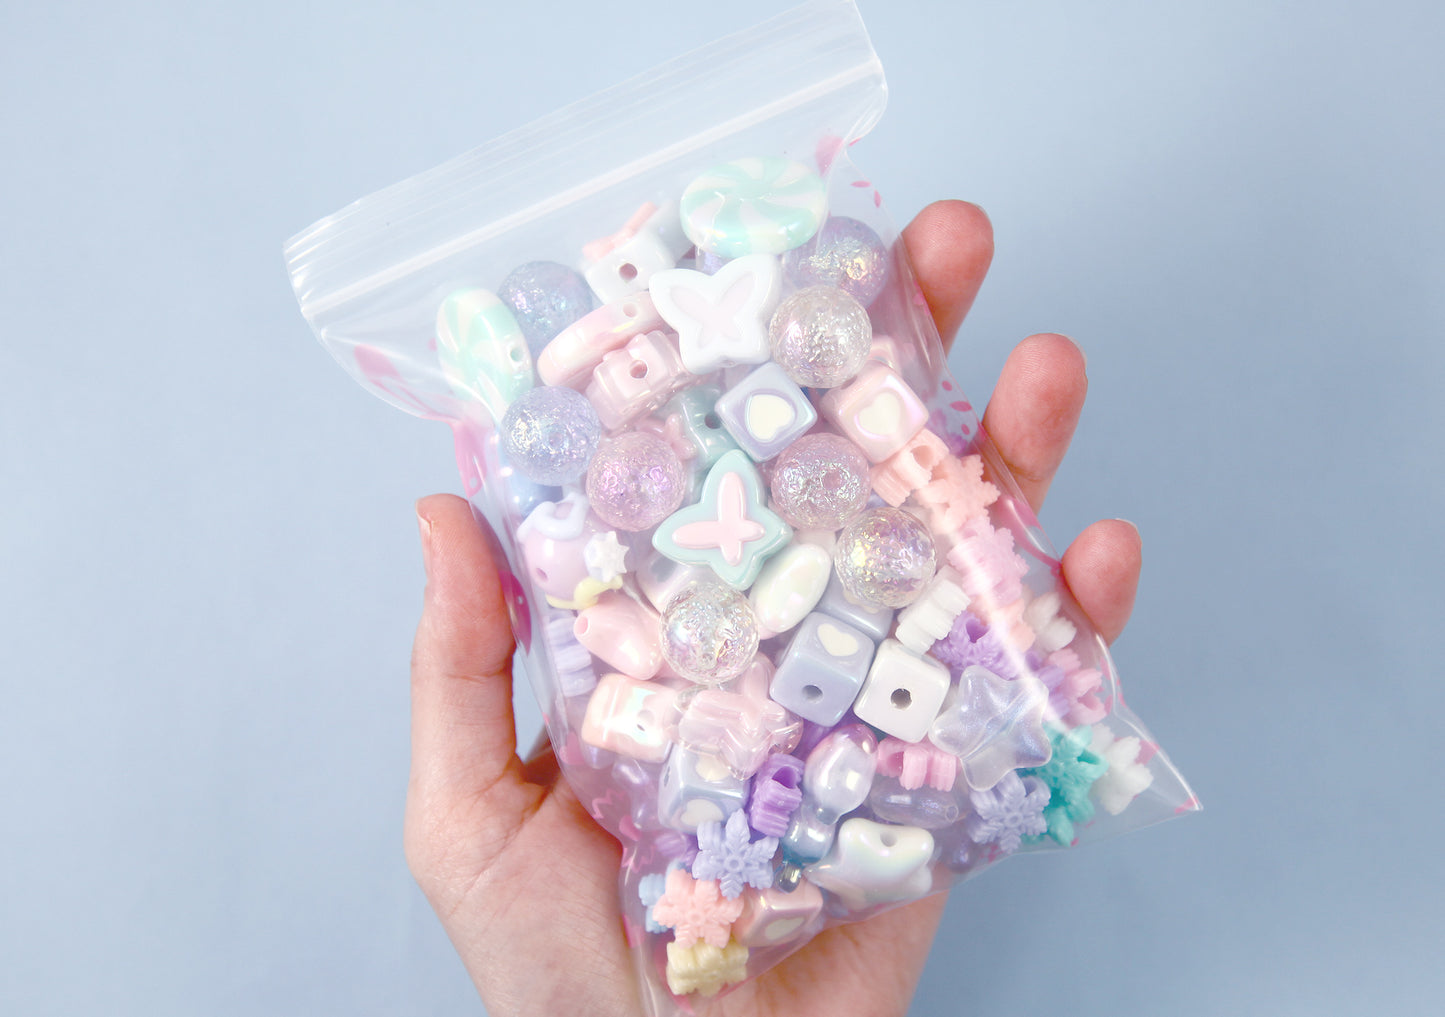 Bead Grab Bag - Icy Iridescent Colors - Mixed Lot of Plastic Beads - great for kandi, ispy, sensory crafts, jewelry making - Over 100 pcs